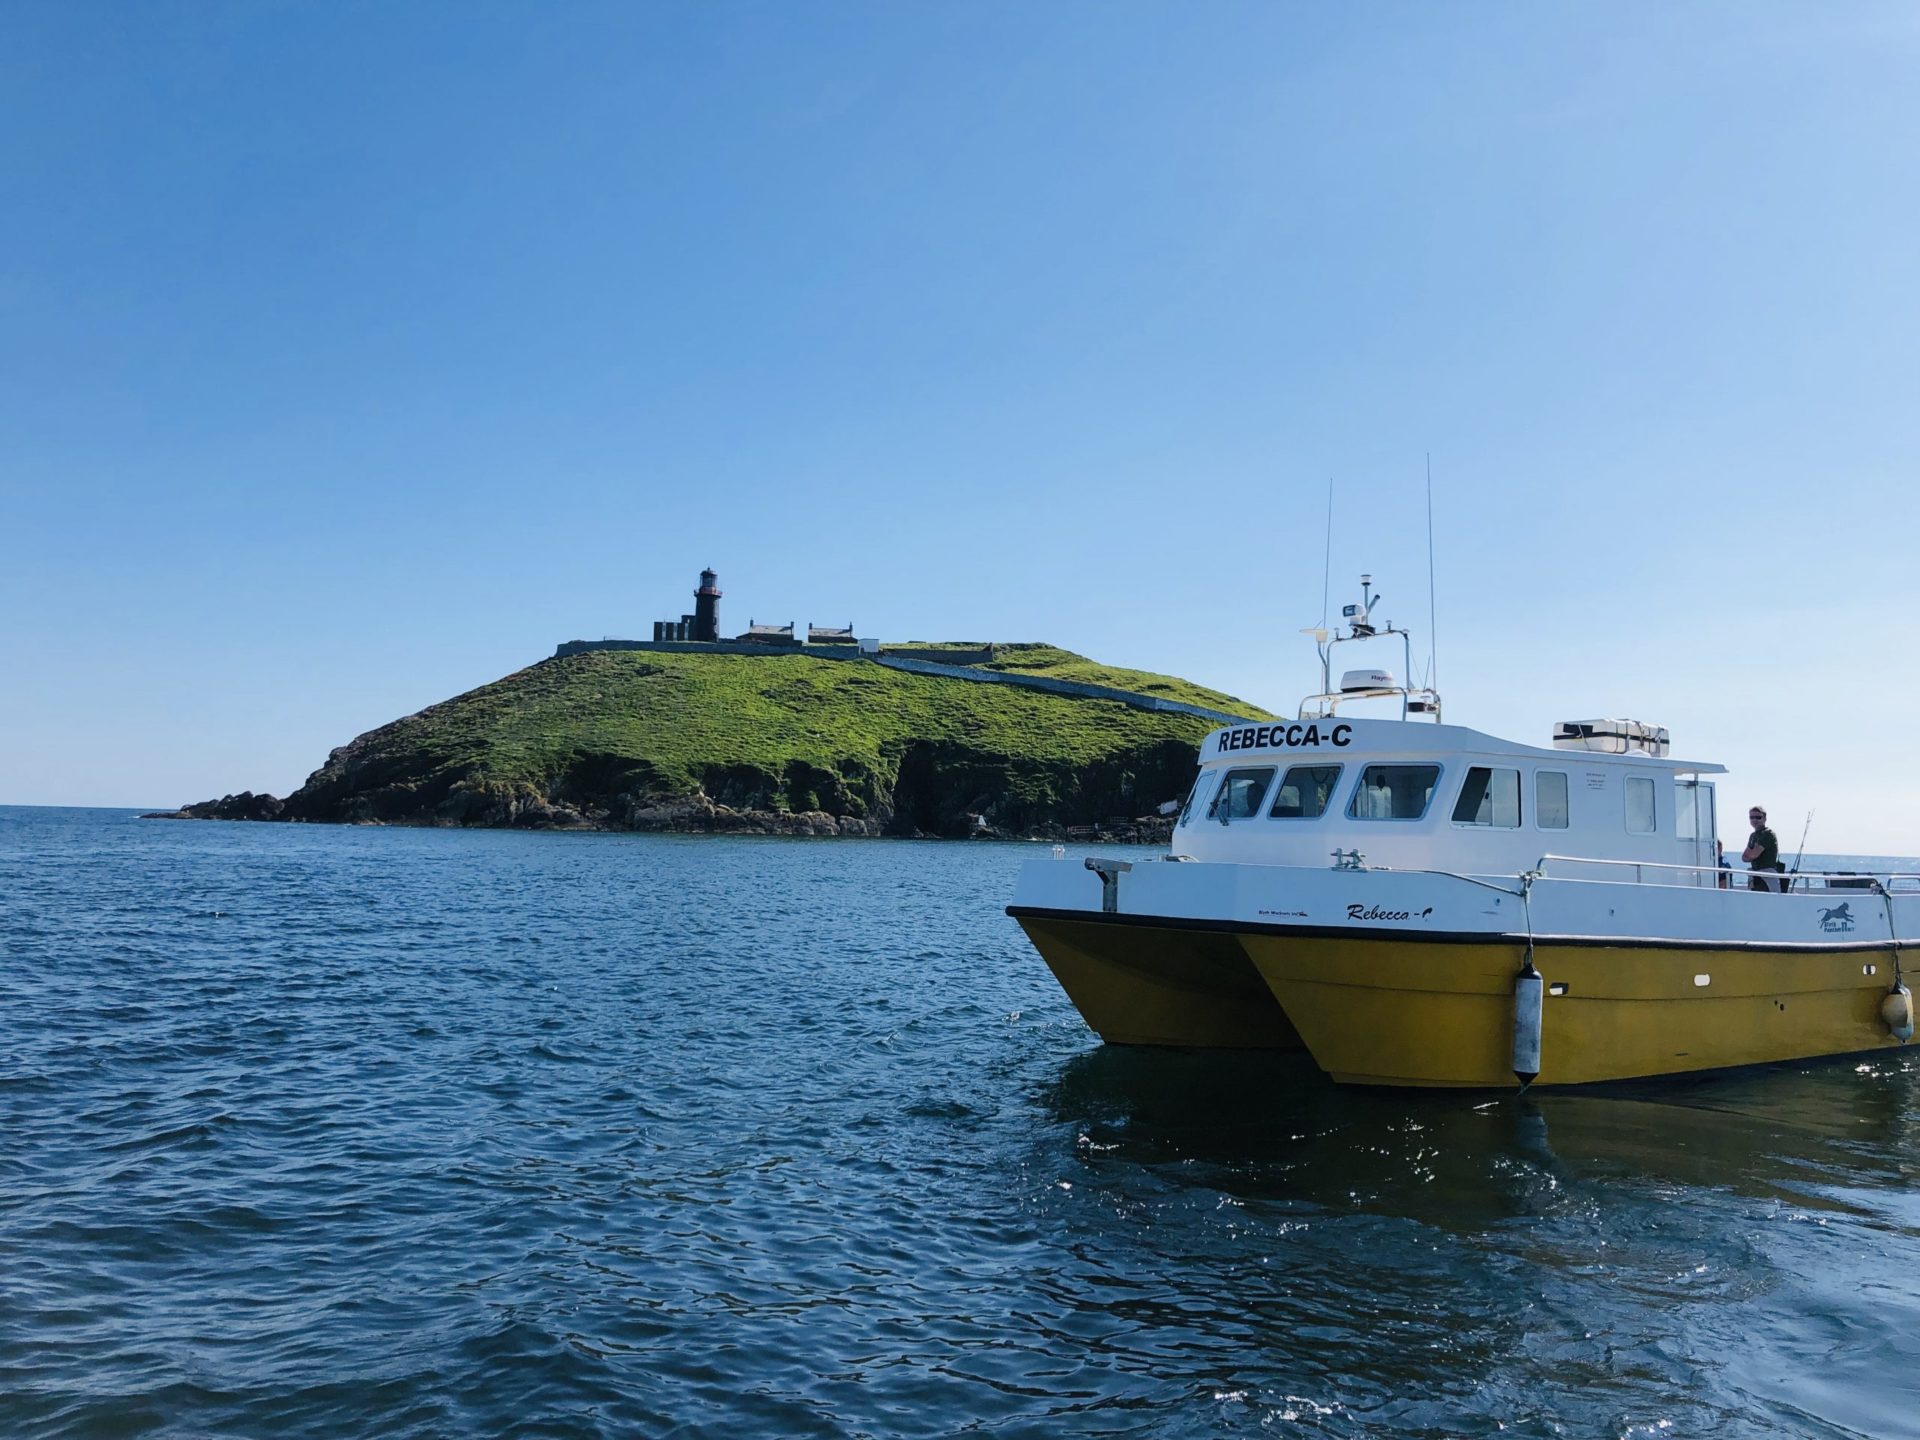 Ballycotton boat Tours – Great location for sightseeing